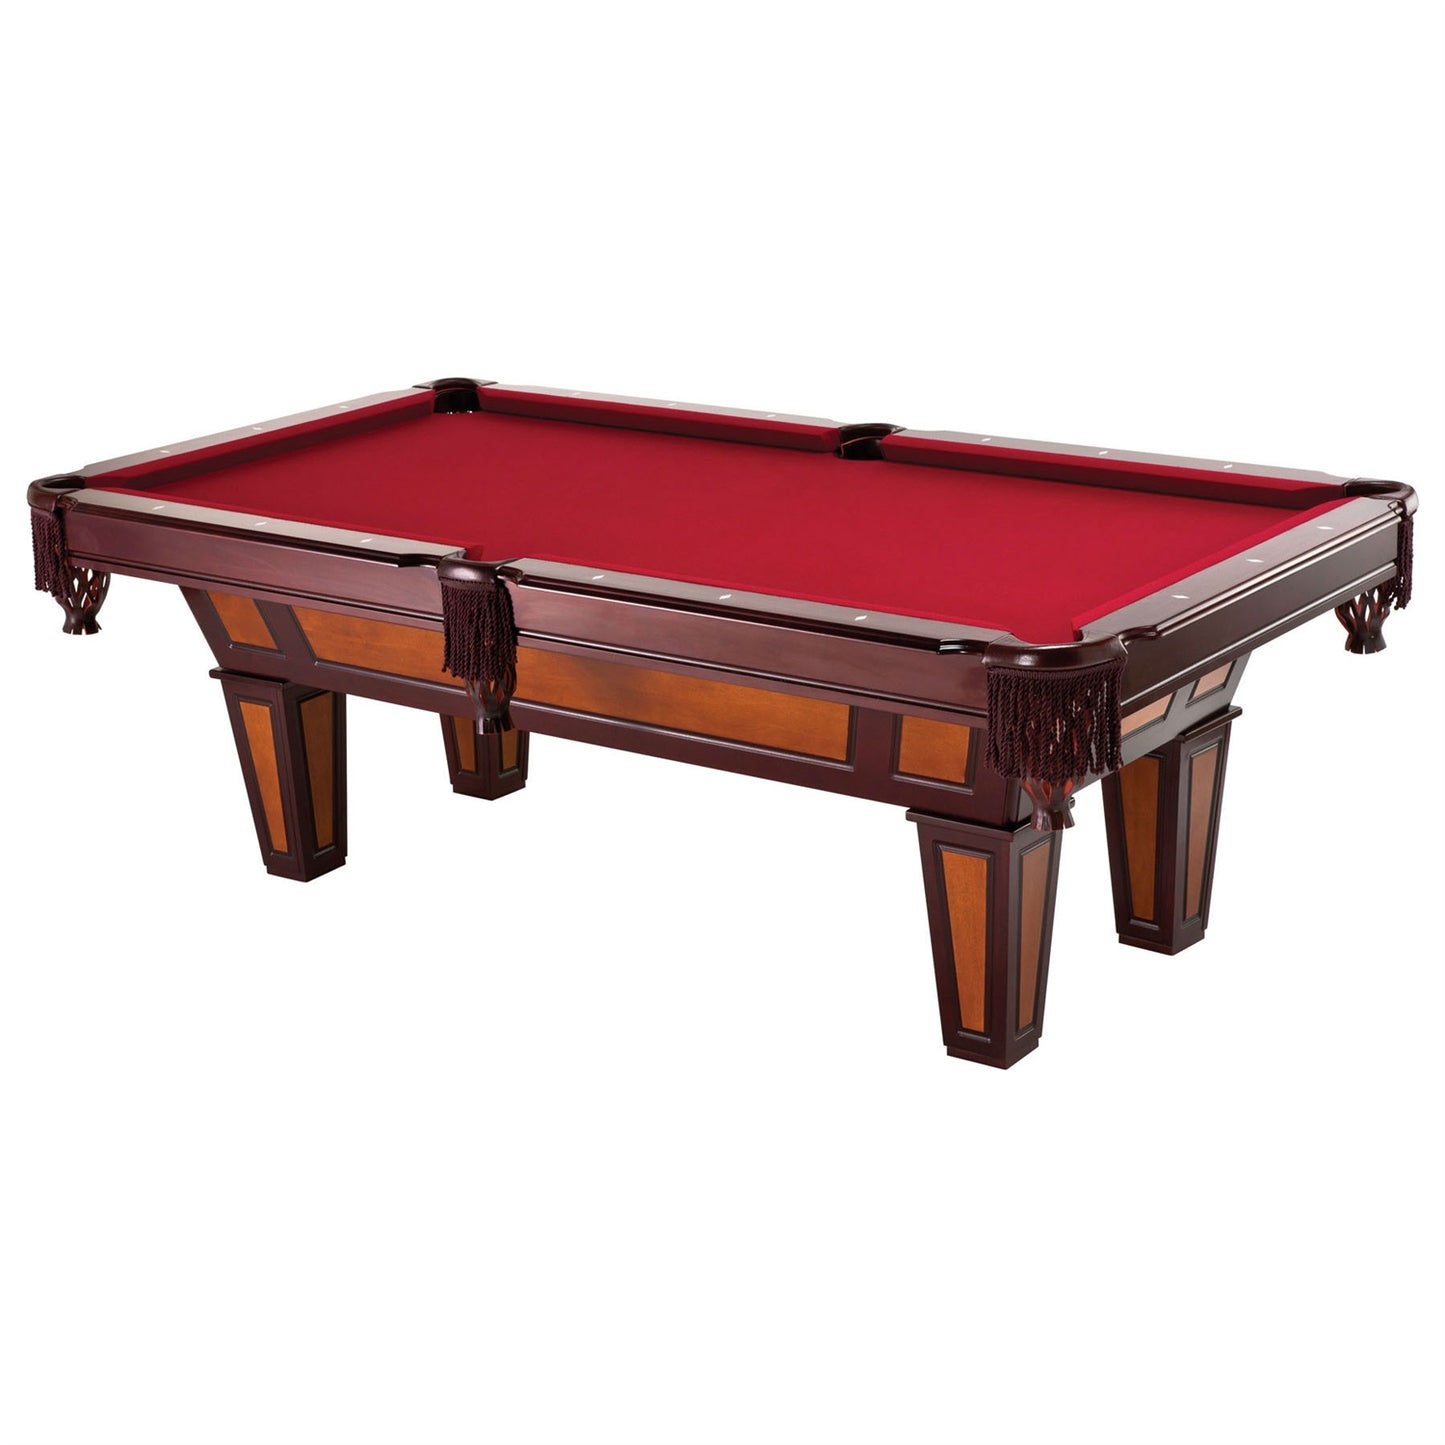 7 Ft Pool Table with Red Burgundy Wool Top and Fringe Drop Pockets